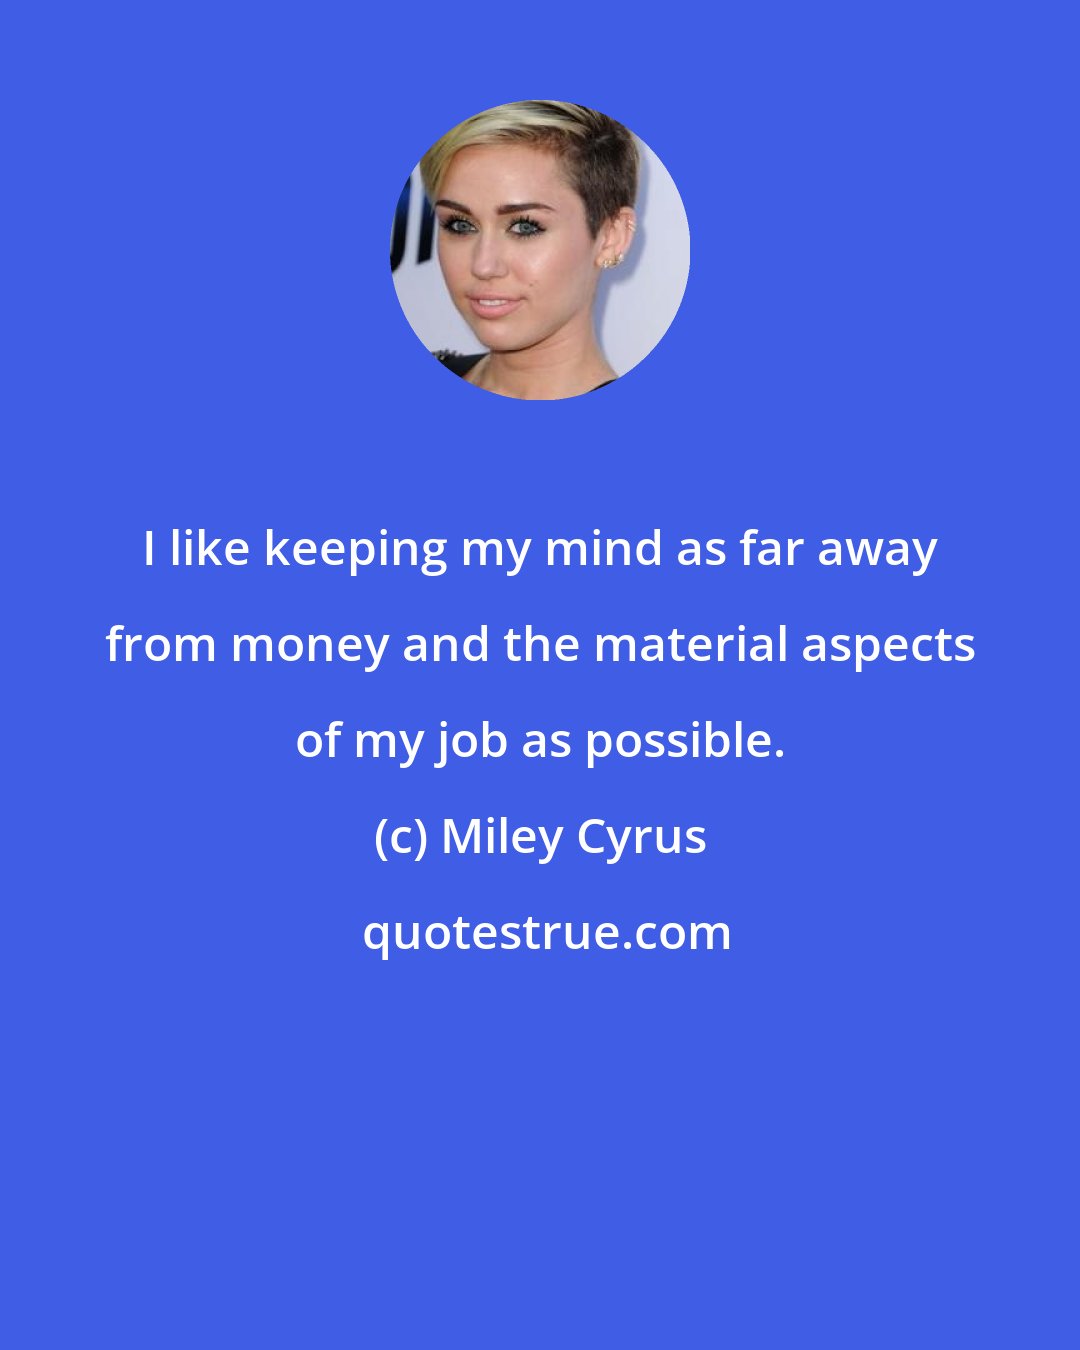 Miley Cyrus: I like keeping my mind as far away from money and the material aspects of my job as possible.